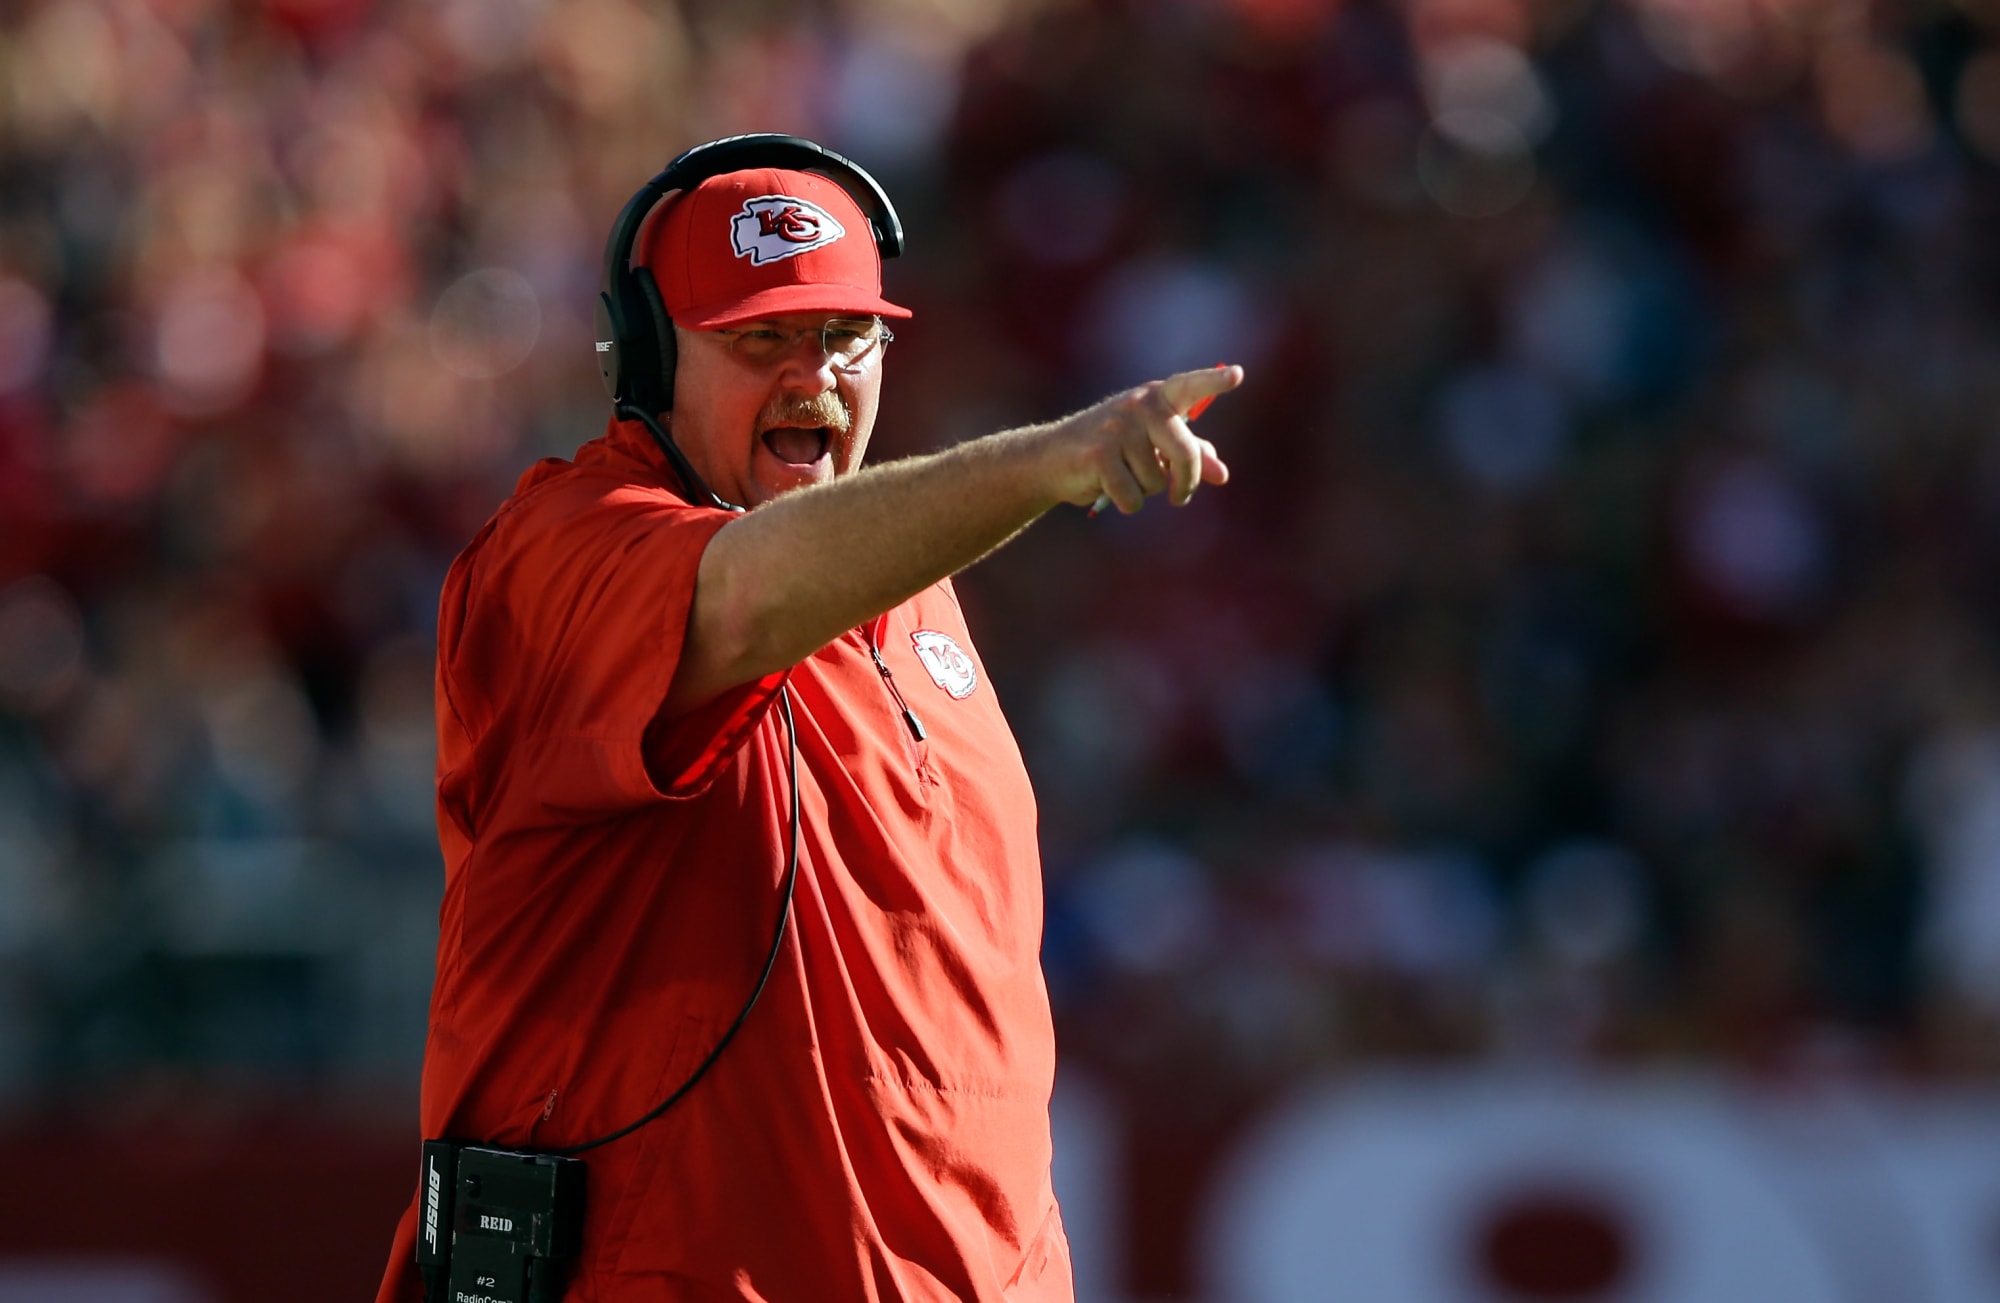 Where does Andy Reid rank among active NFL coaches?